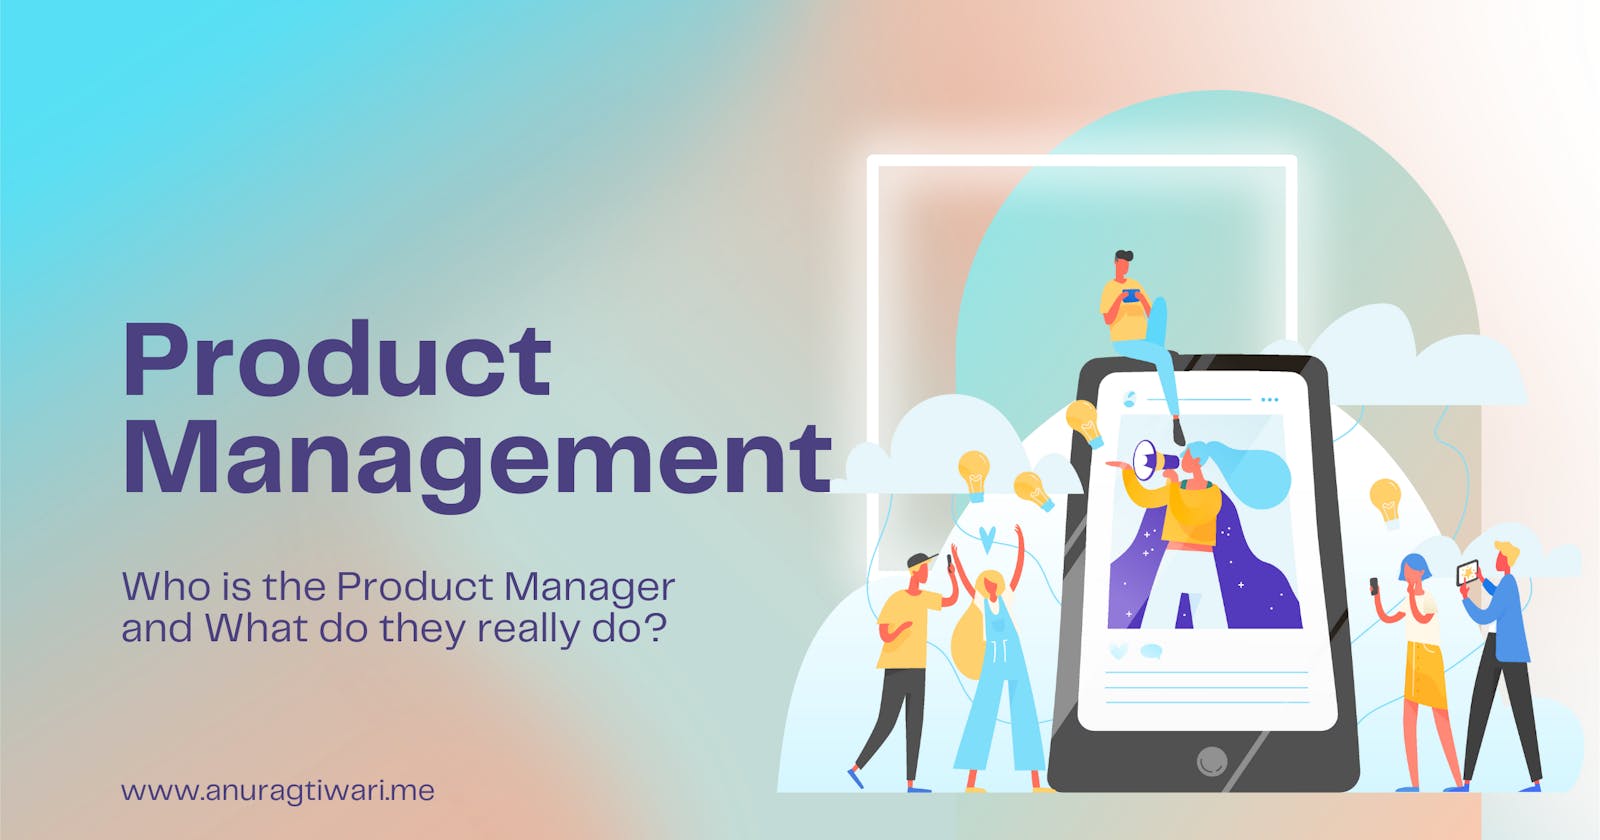 Who is the Product Manager and What do they really do?